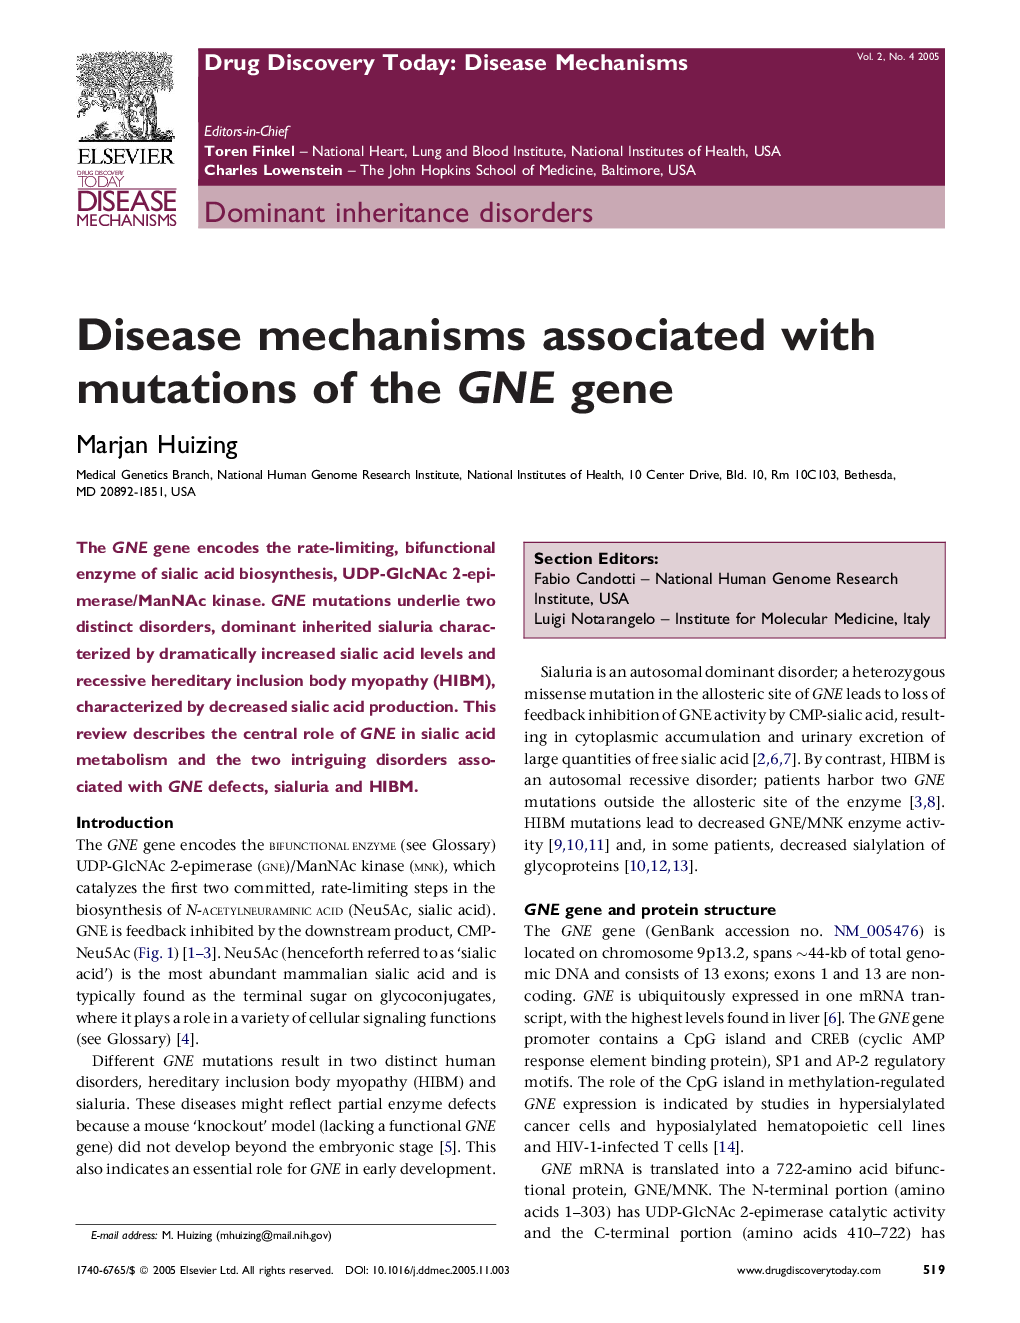 Disease mechanisms associated with mutations of the GNE gene